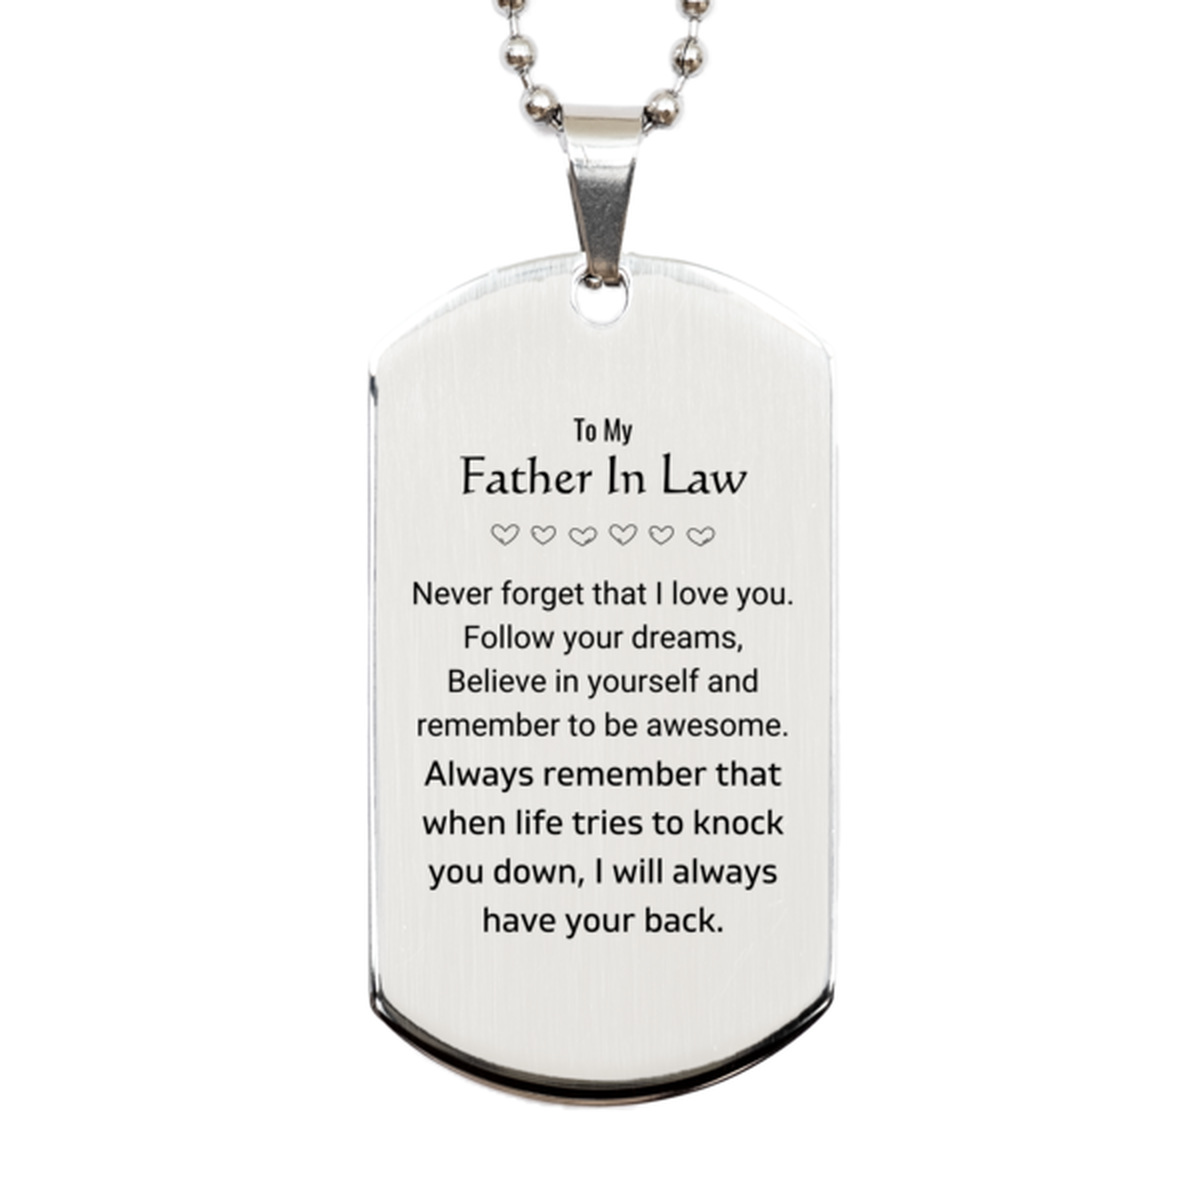 Inspirational Gifts for Father In Law, Follow your dreams, Believe in yourself, Father In Law Silver Dog Tag, Birthday Christmas Unique Gifts For Father In Law